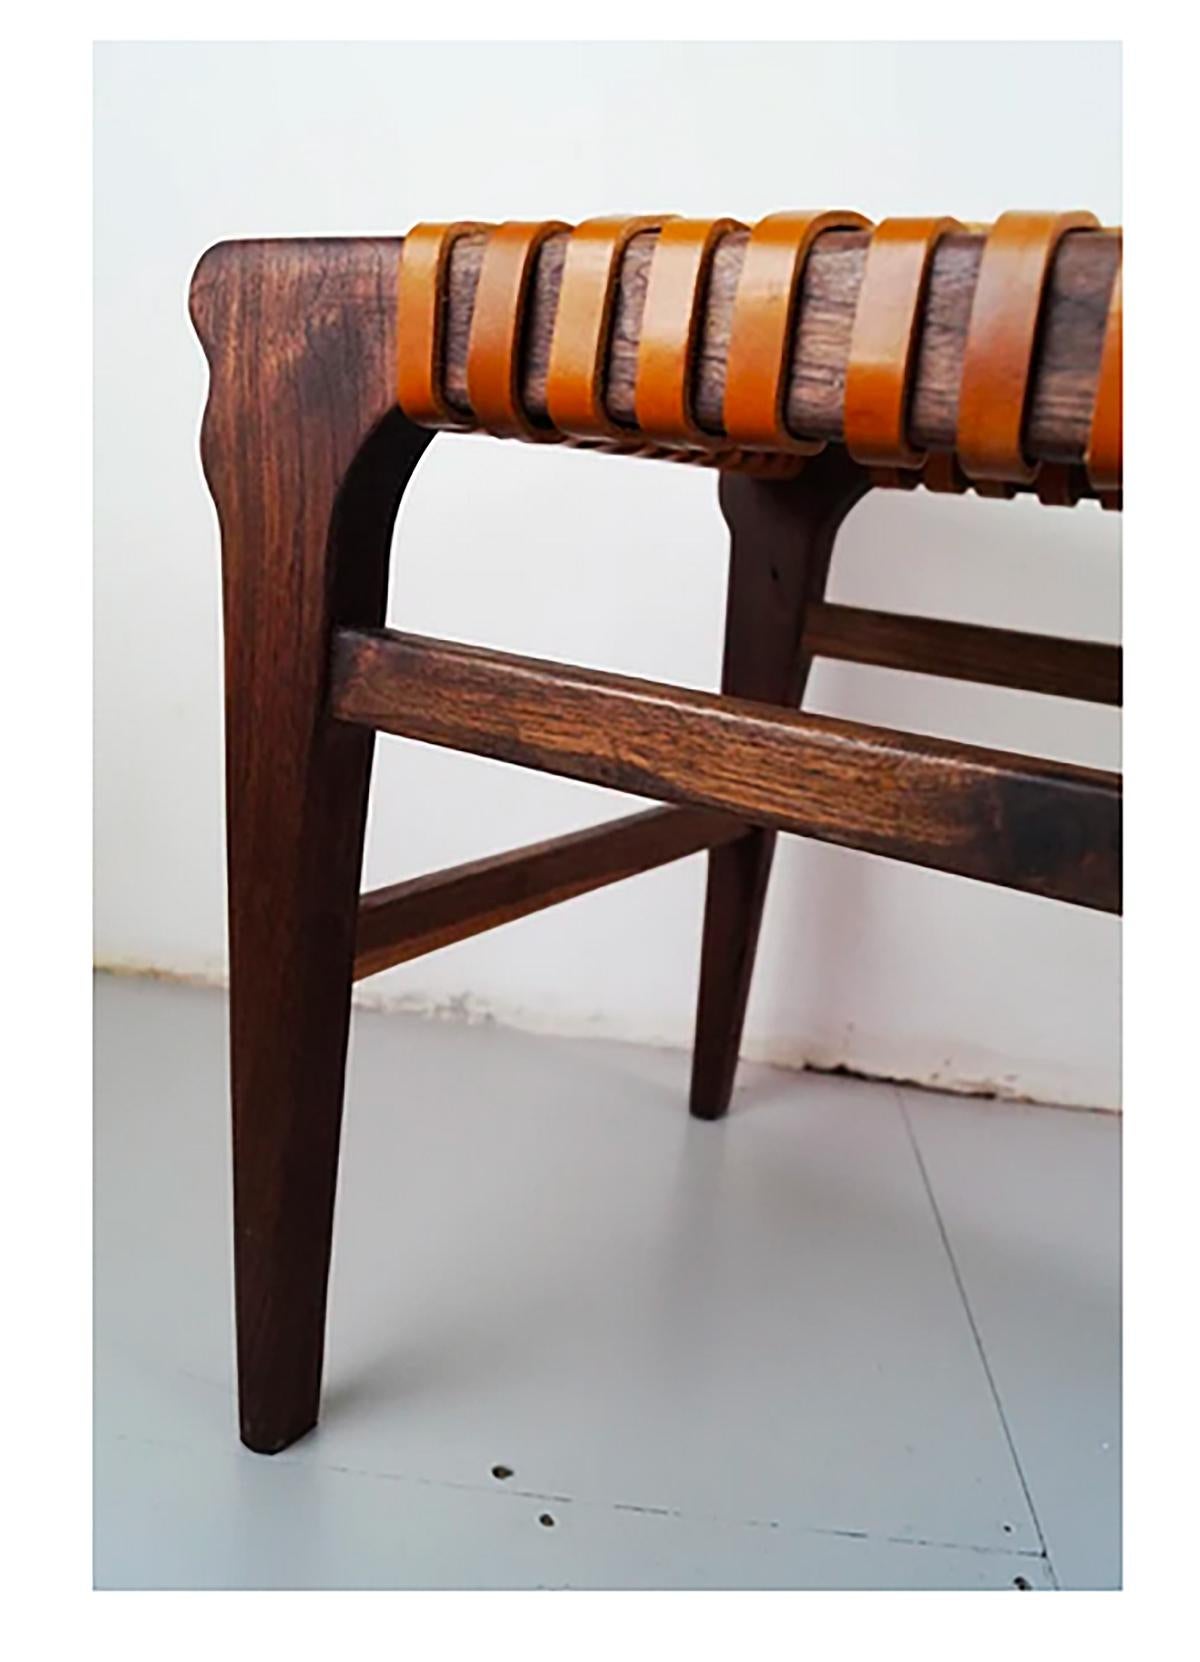 Walnut Bench with Leather Webbing. To order
Bench by John A. Harris. Various sizes are available.
Dimensions: W 140 x D 40 x H 43 cm
Pre-order, lead time 4 to 6 weeks.

​